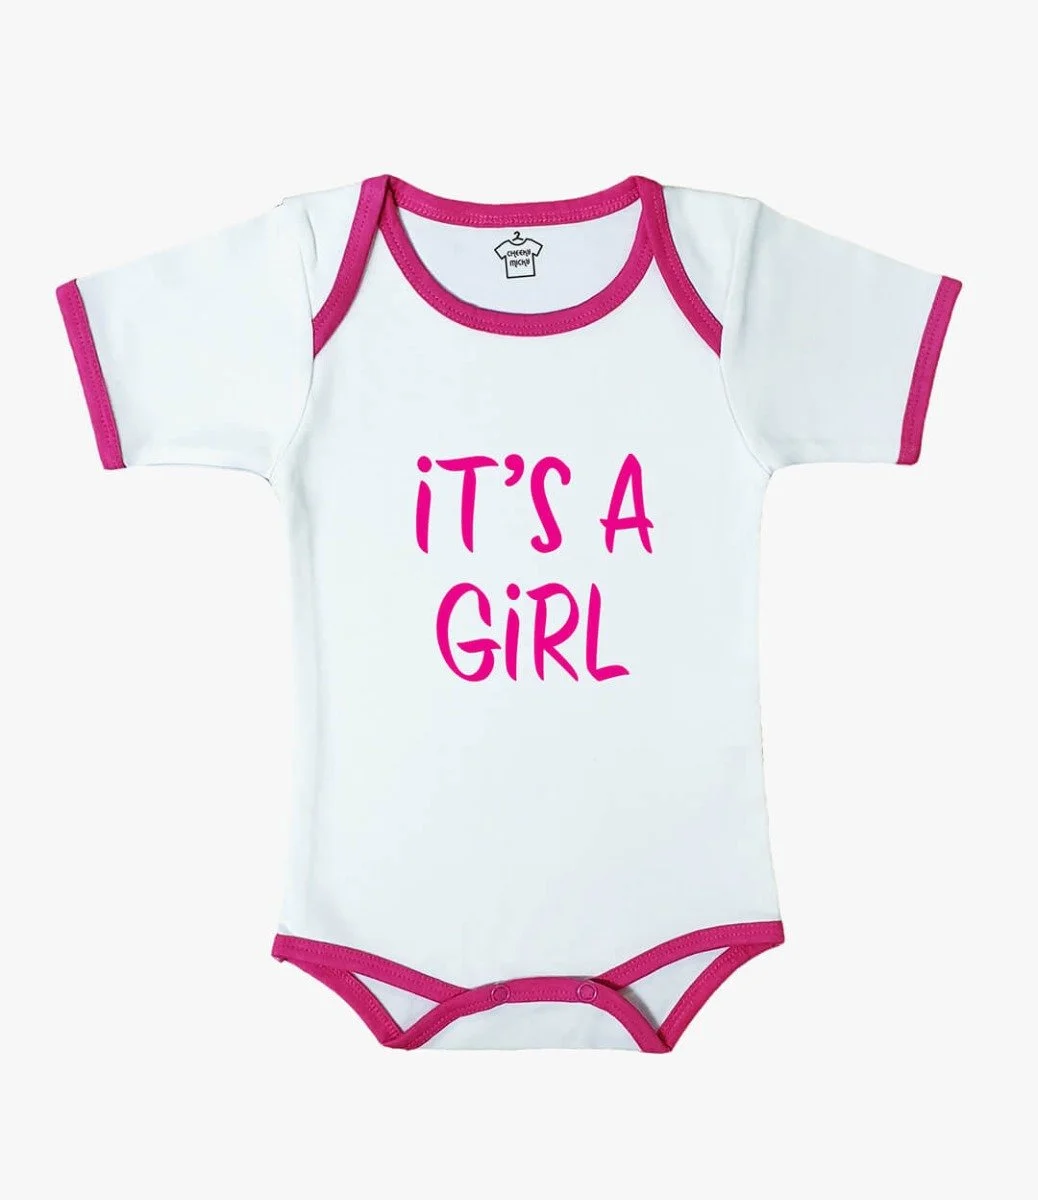 It's a Girl' Baby Bodysuit By Fay Lawson